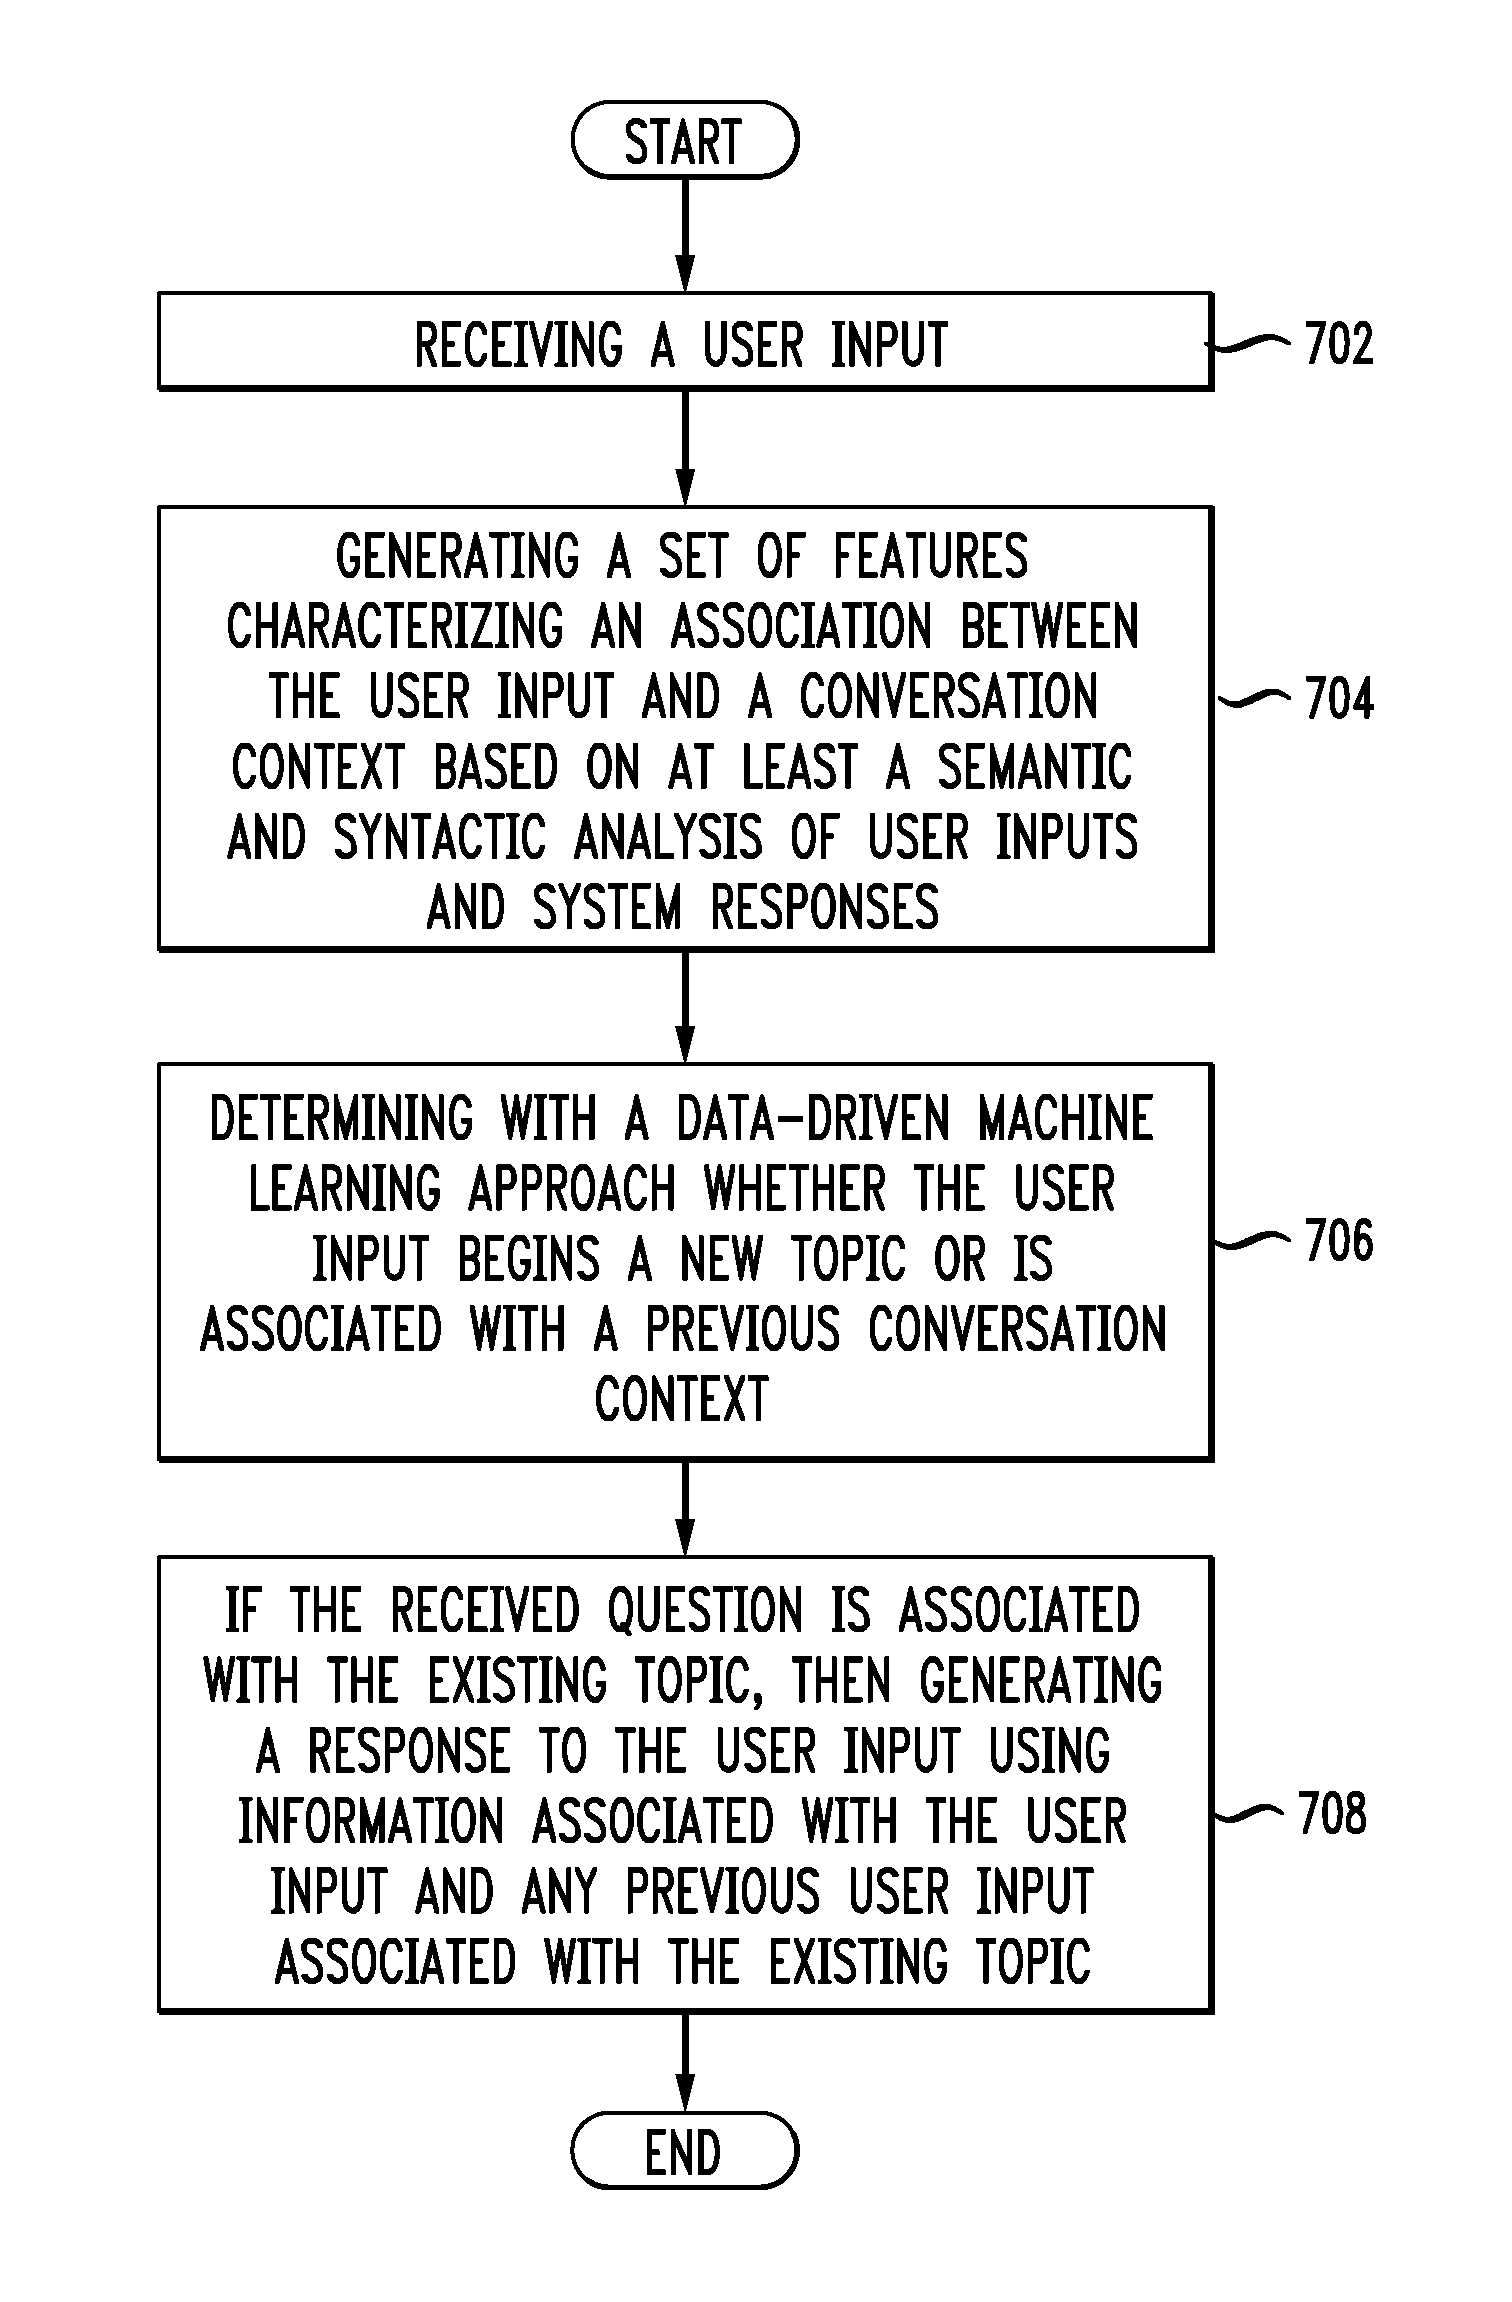 Relevance recognition for a human machine dialog system contextual question answering based on a normalization of the length of the user input